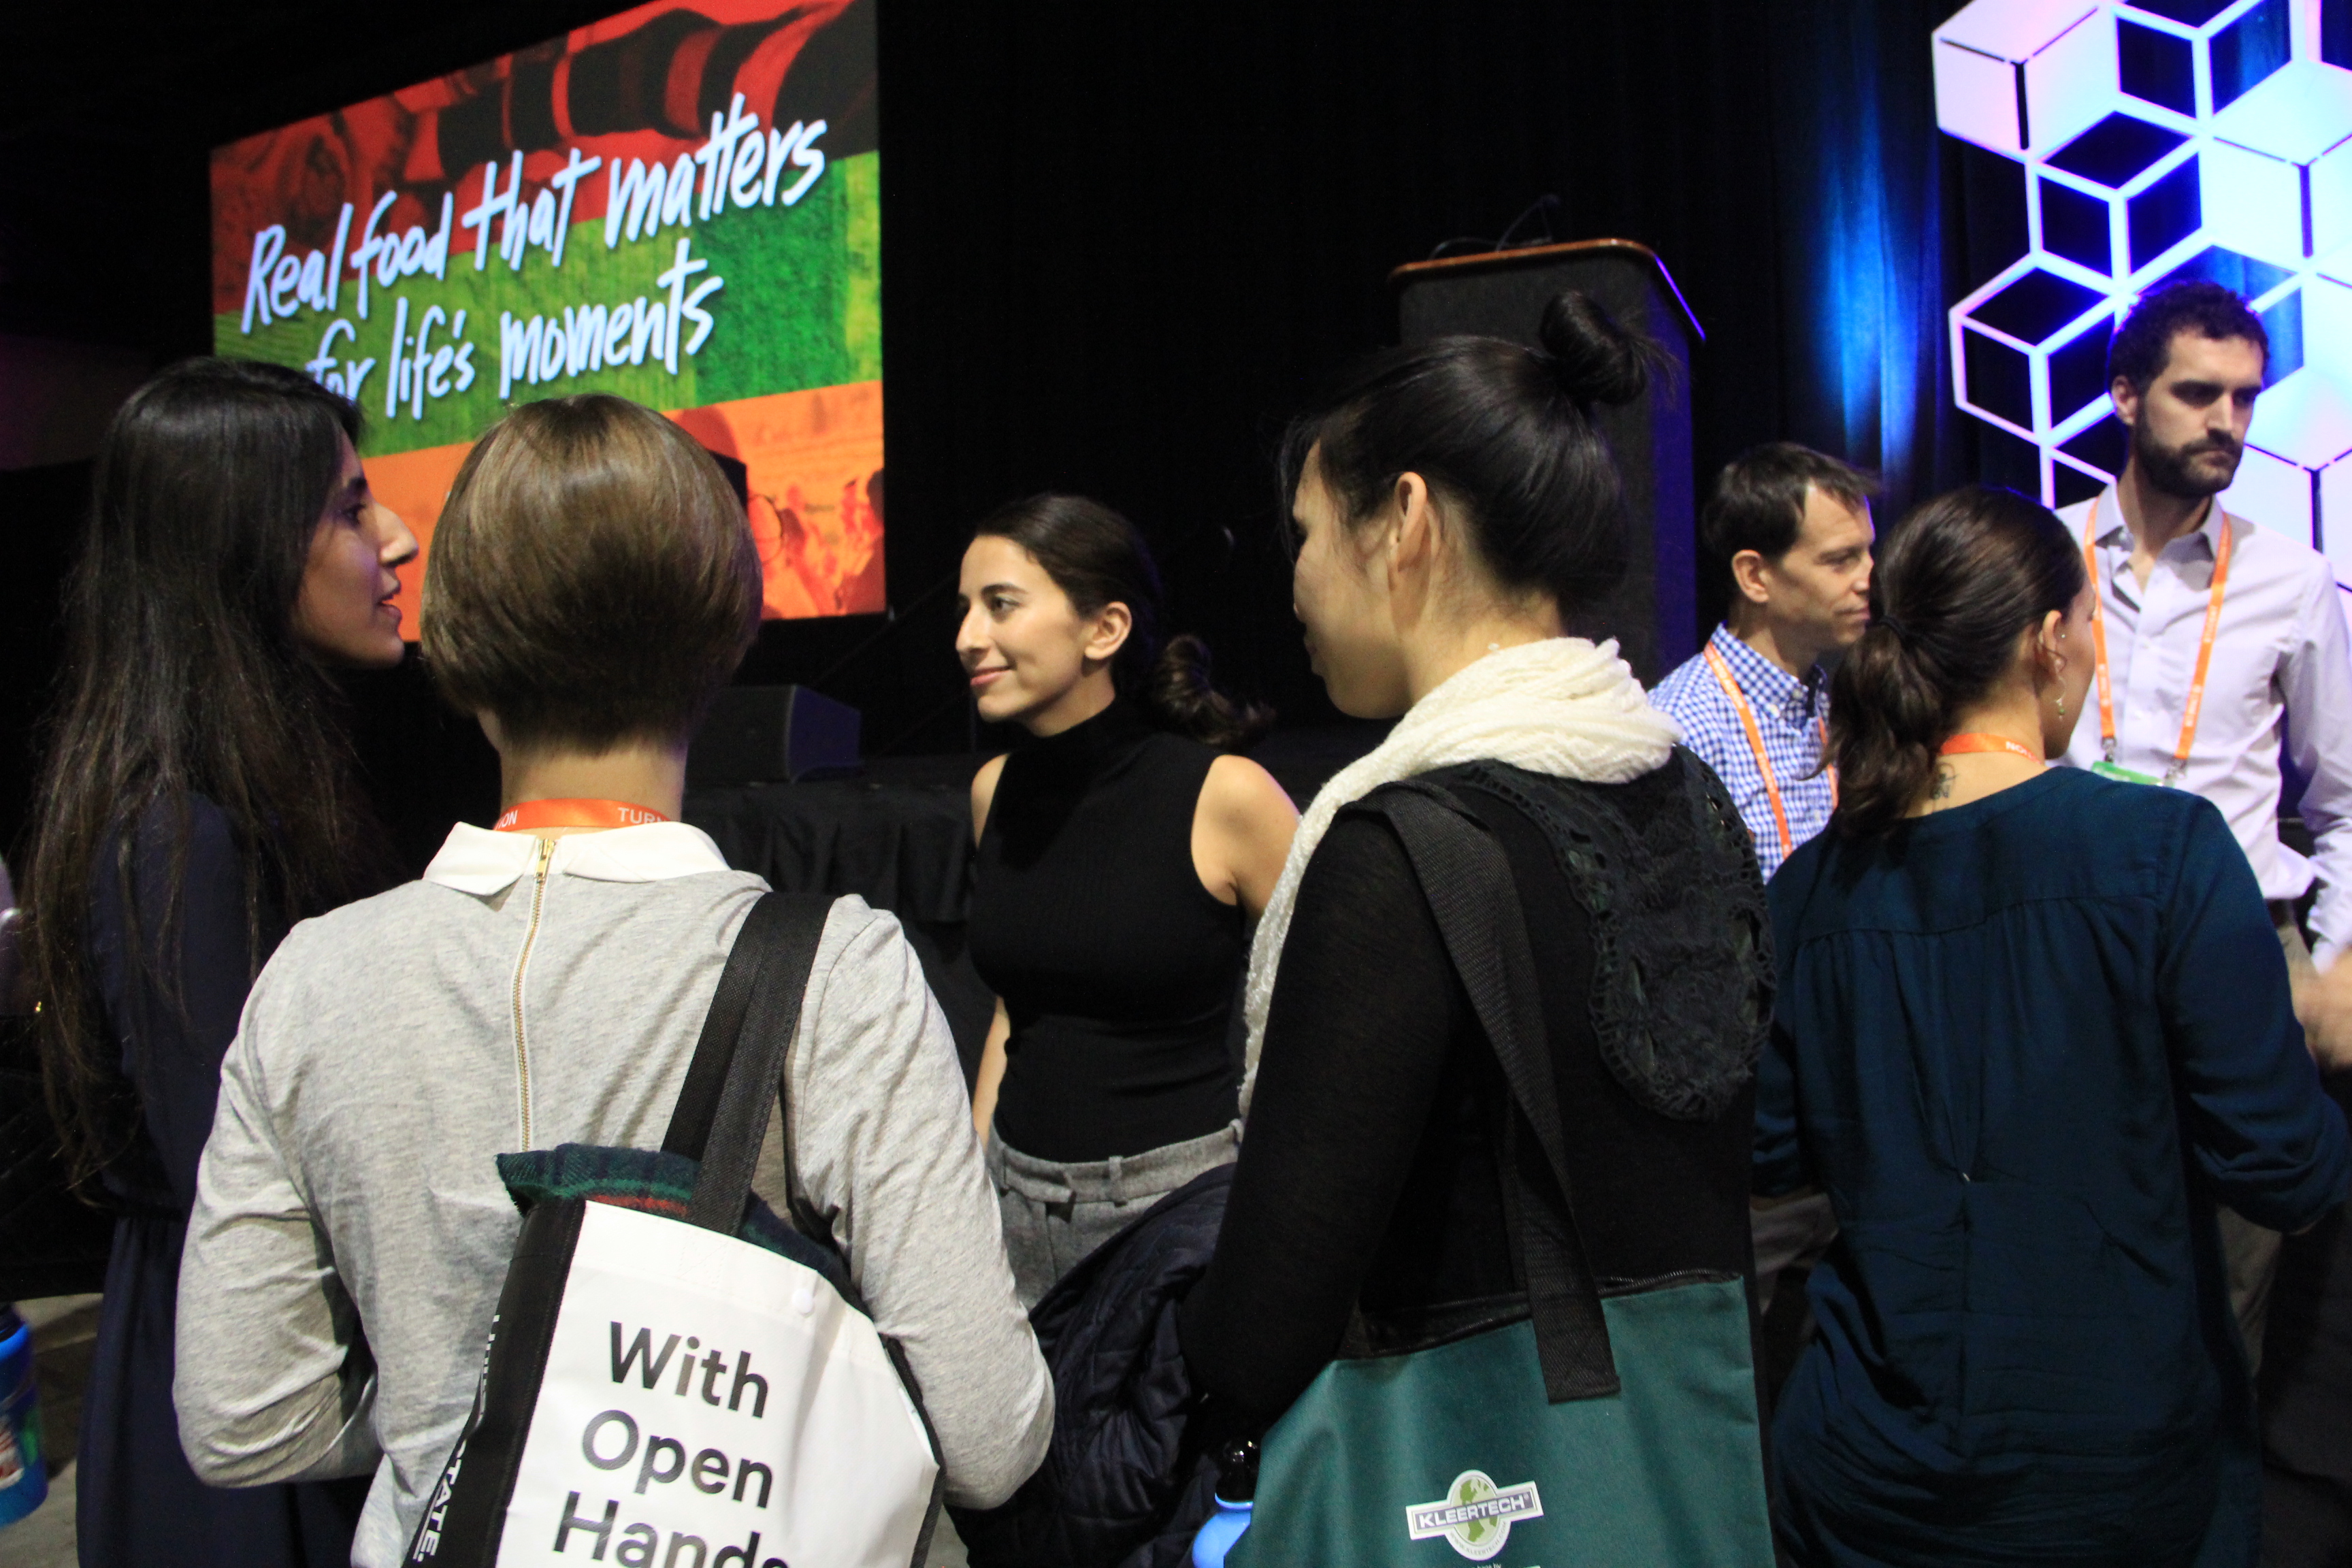 Attendees networking with Sustain Natural Co-Founder and Marketing Director, Meika Hollender after her keynote speech.